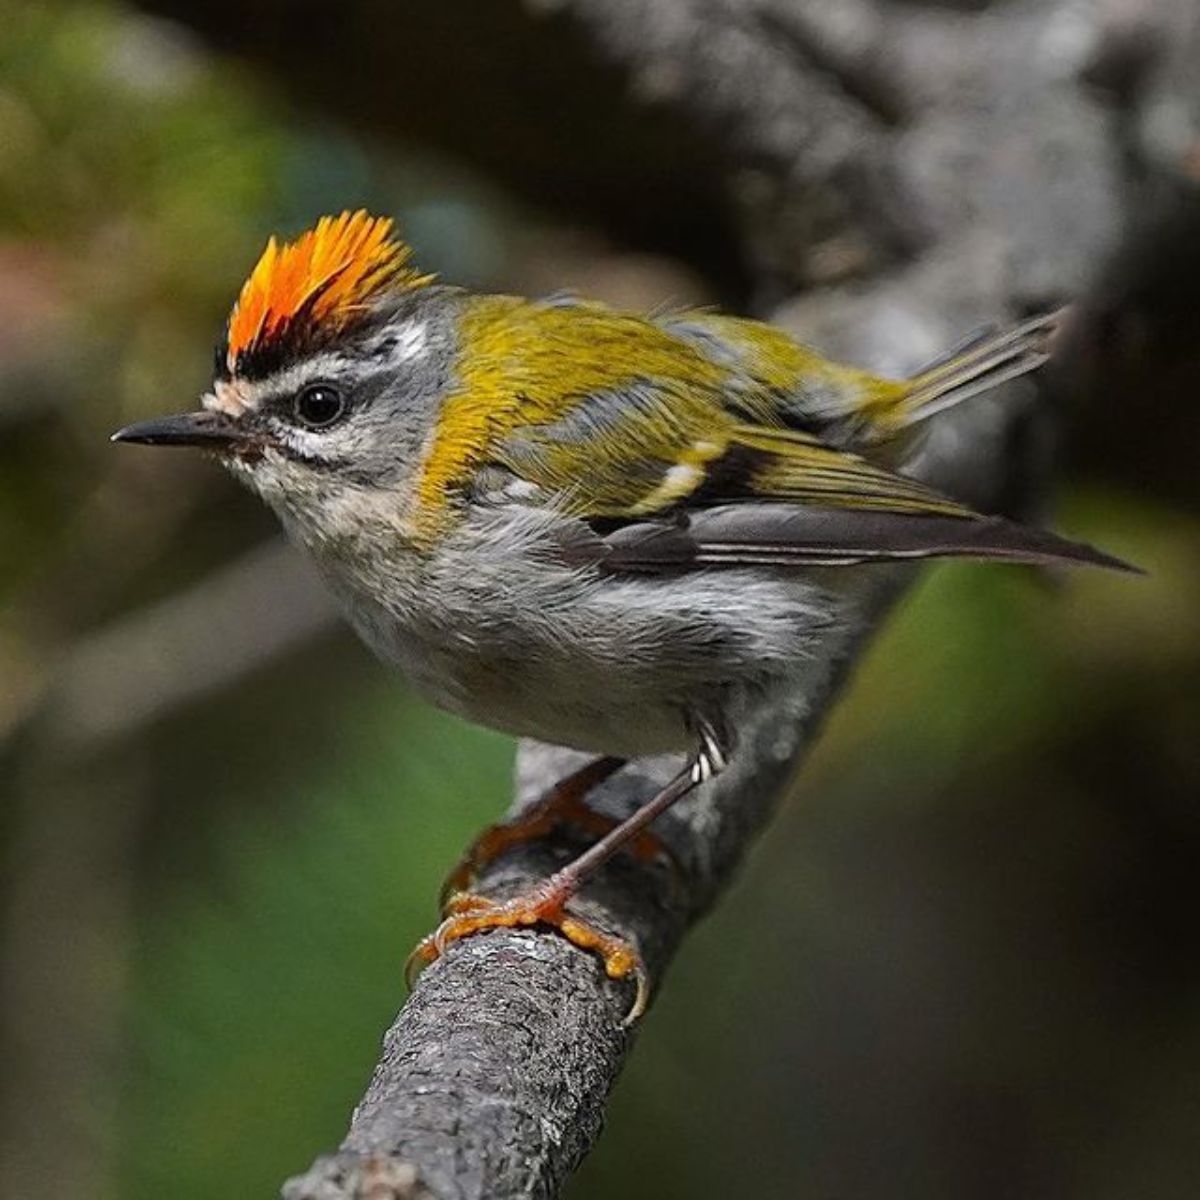 An adorable Common Firecrest perched on a branch.